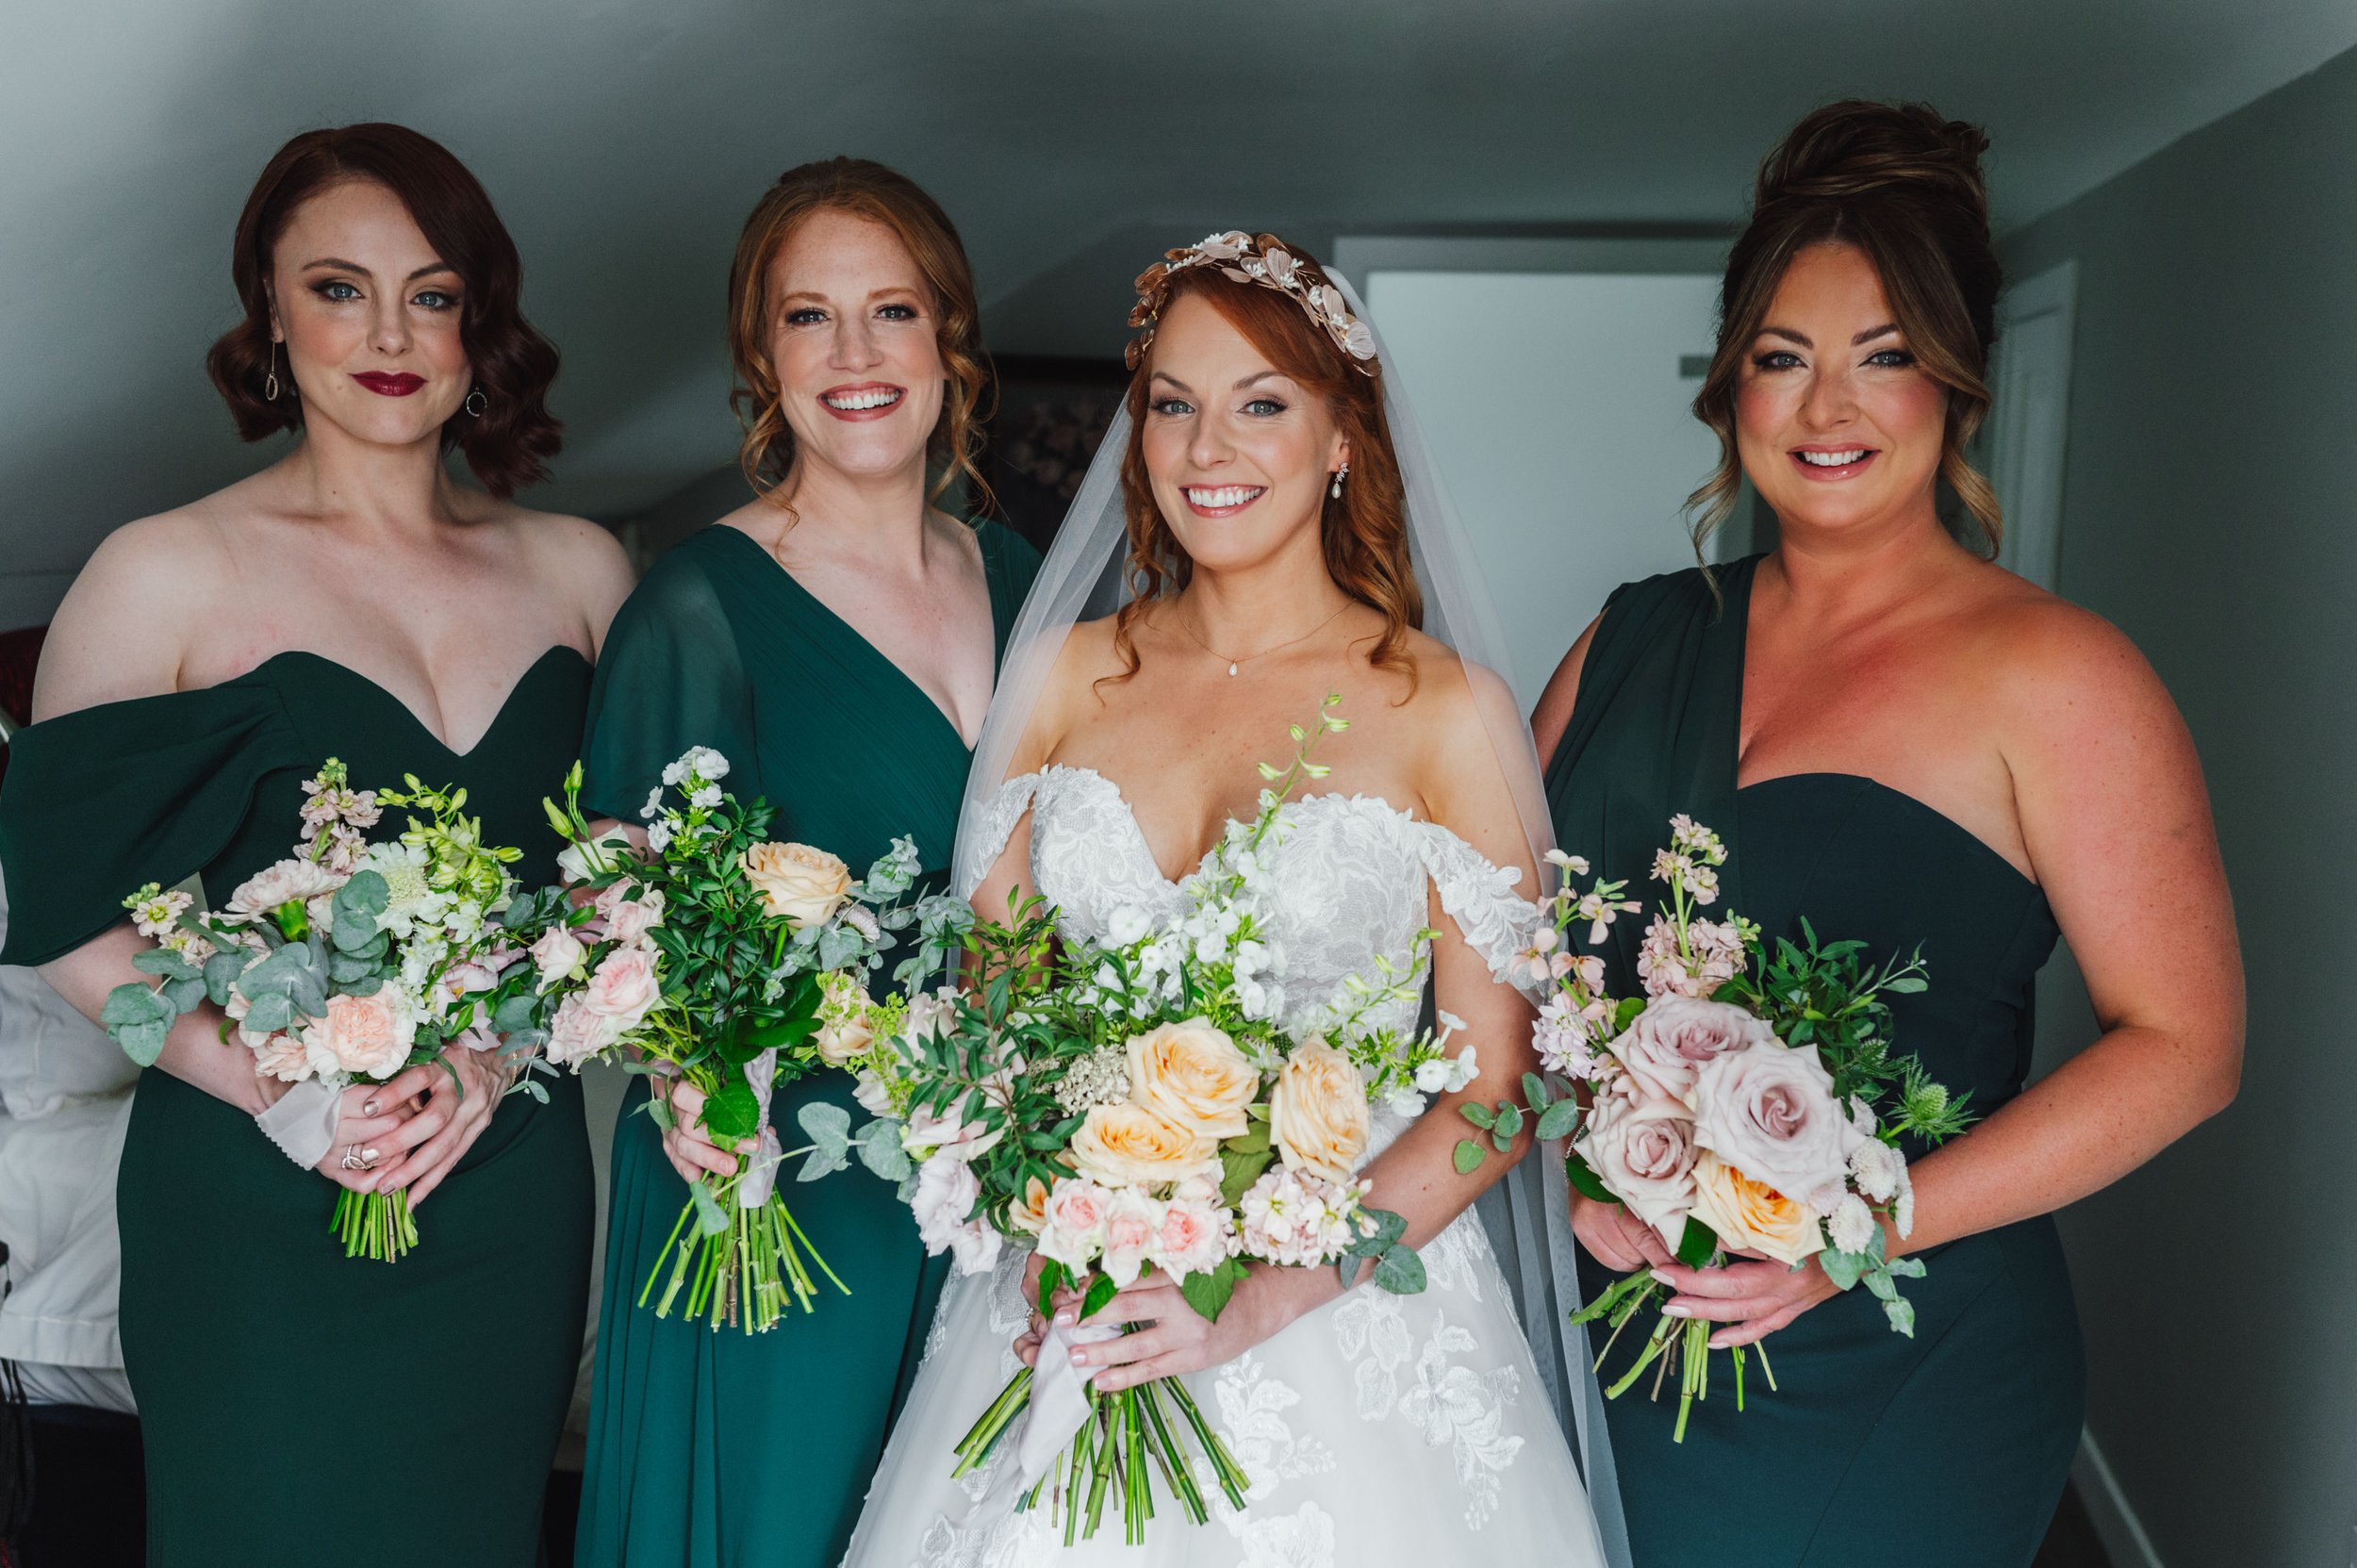  Subtle and stylish bridal party bouquets using cream florals and green foliage.   Photo by Sidey Clark Photography 